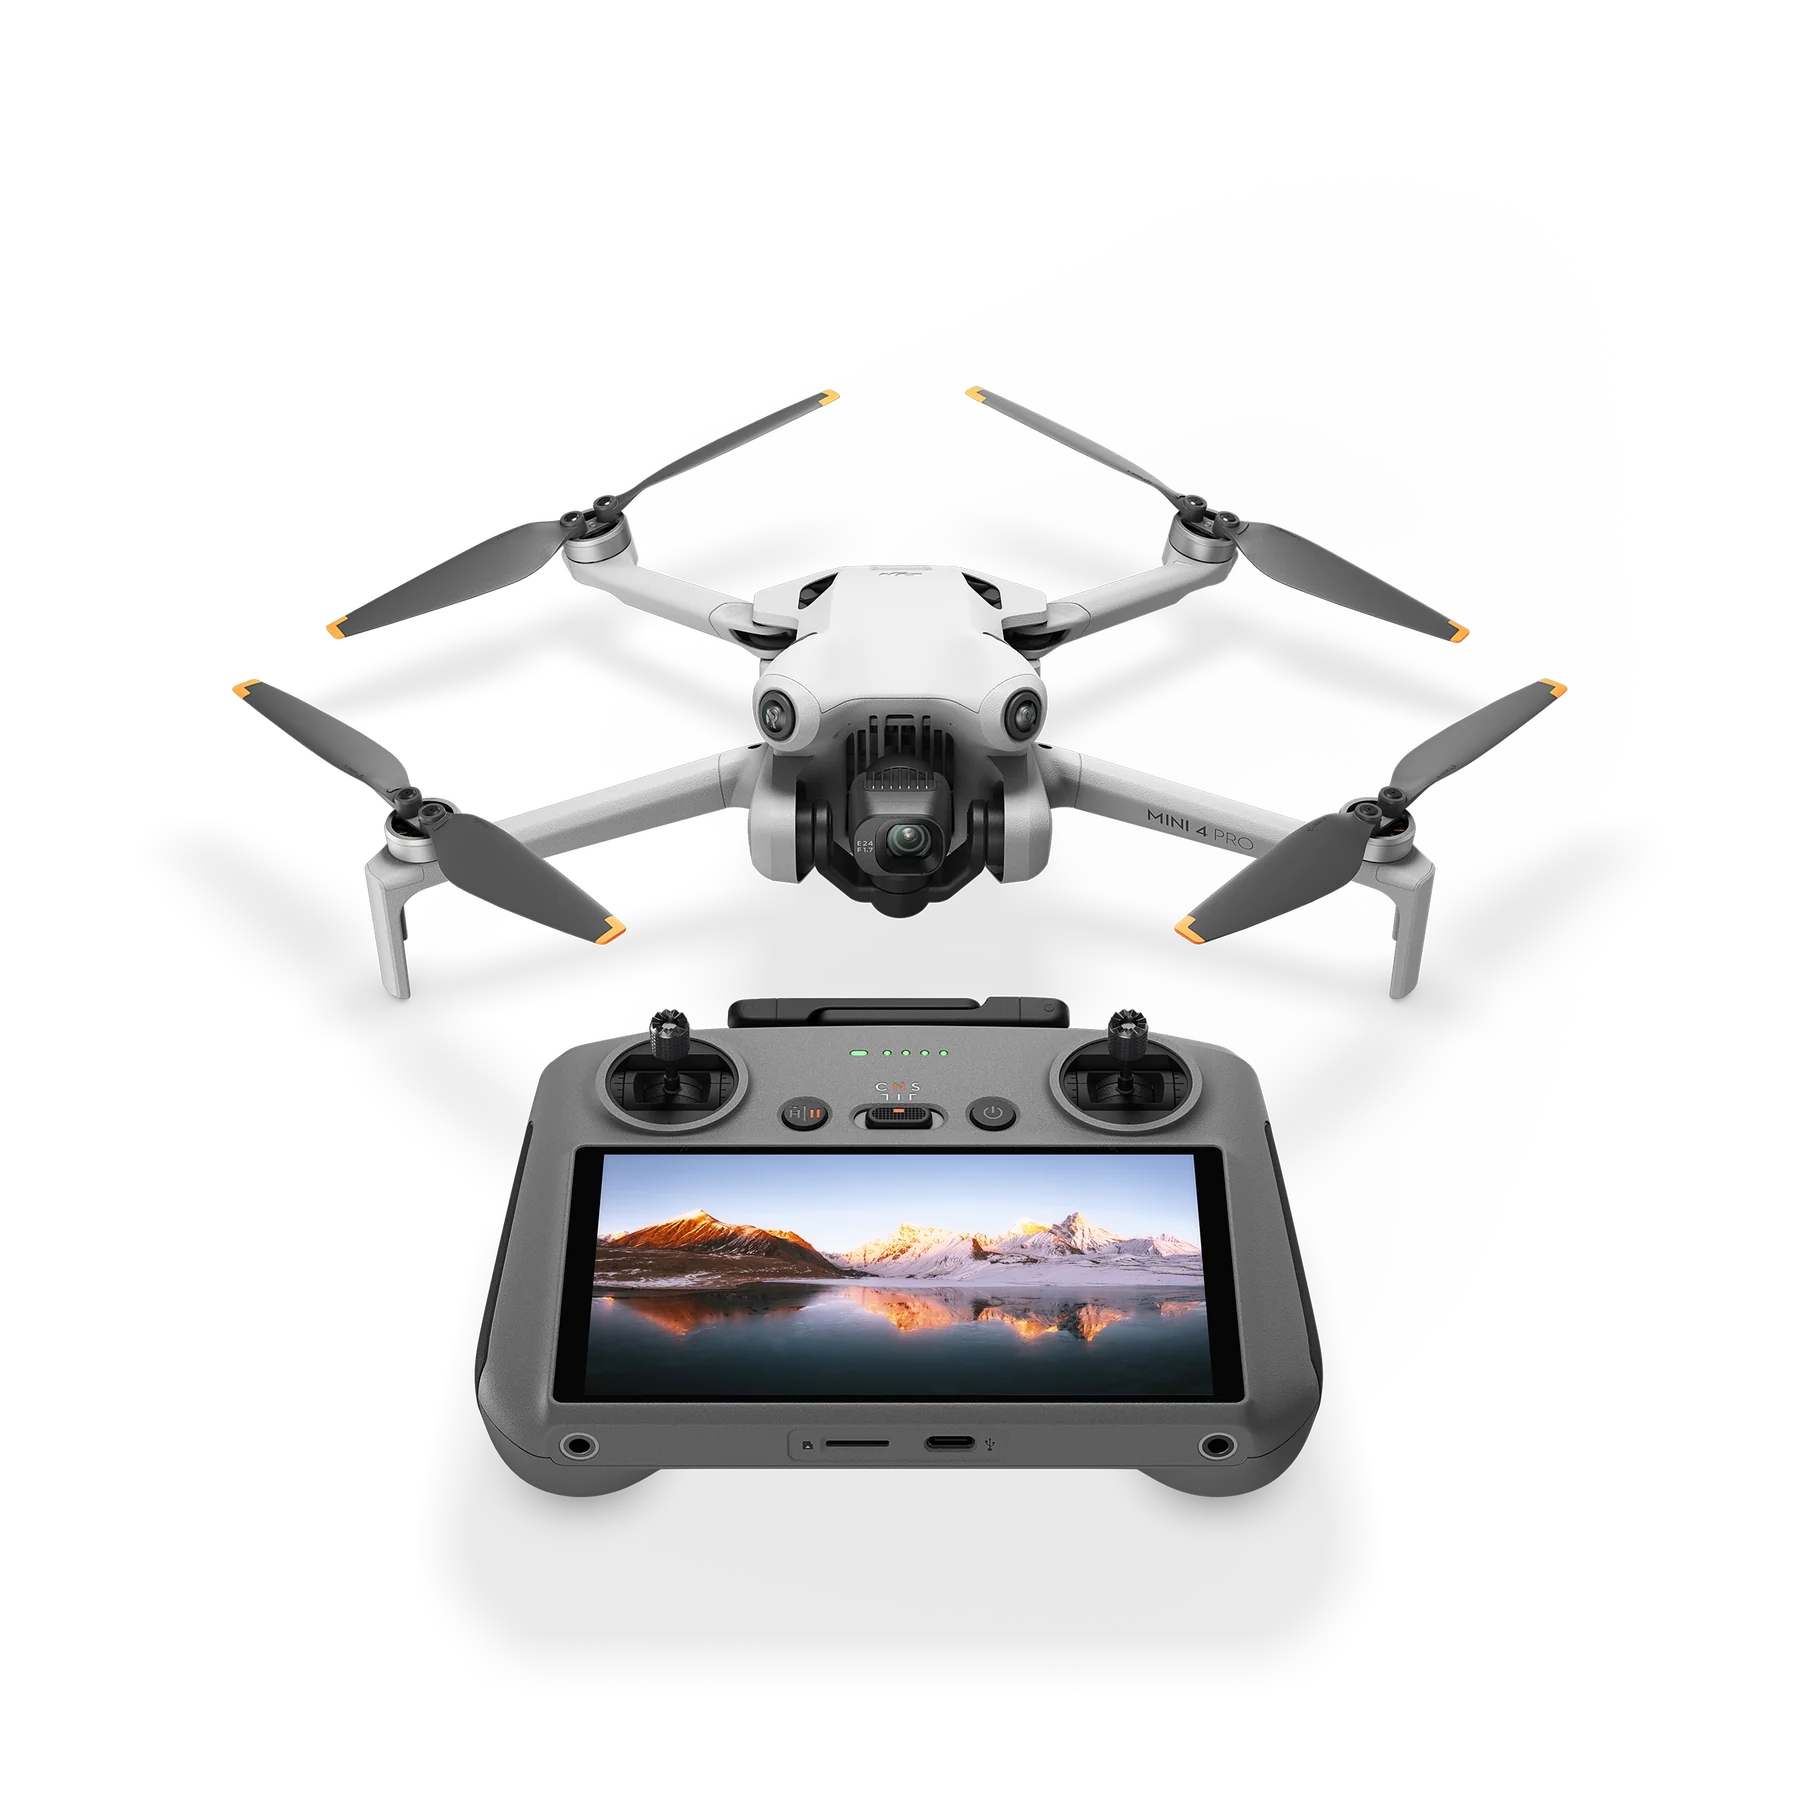 DJI Mini Pro with Remote - Product photo with the drone and remote control head on